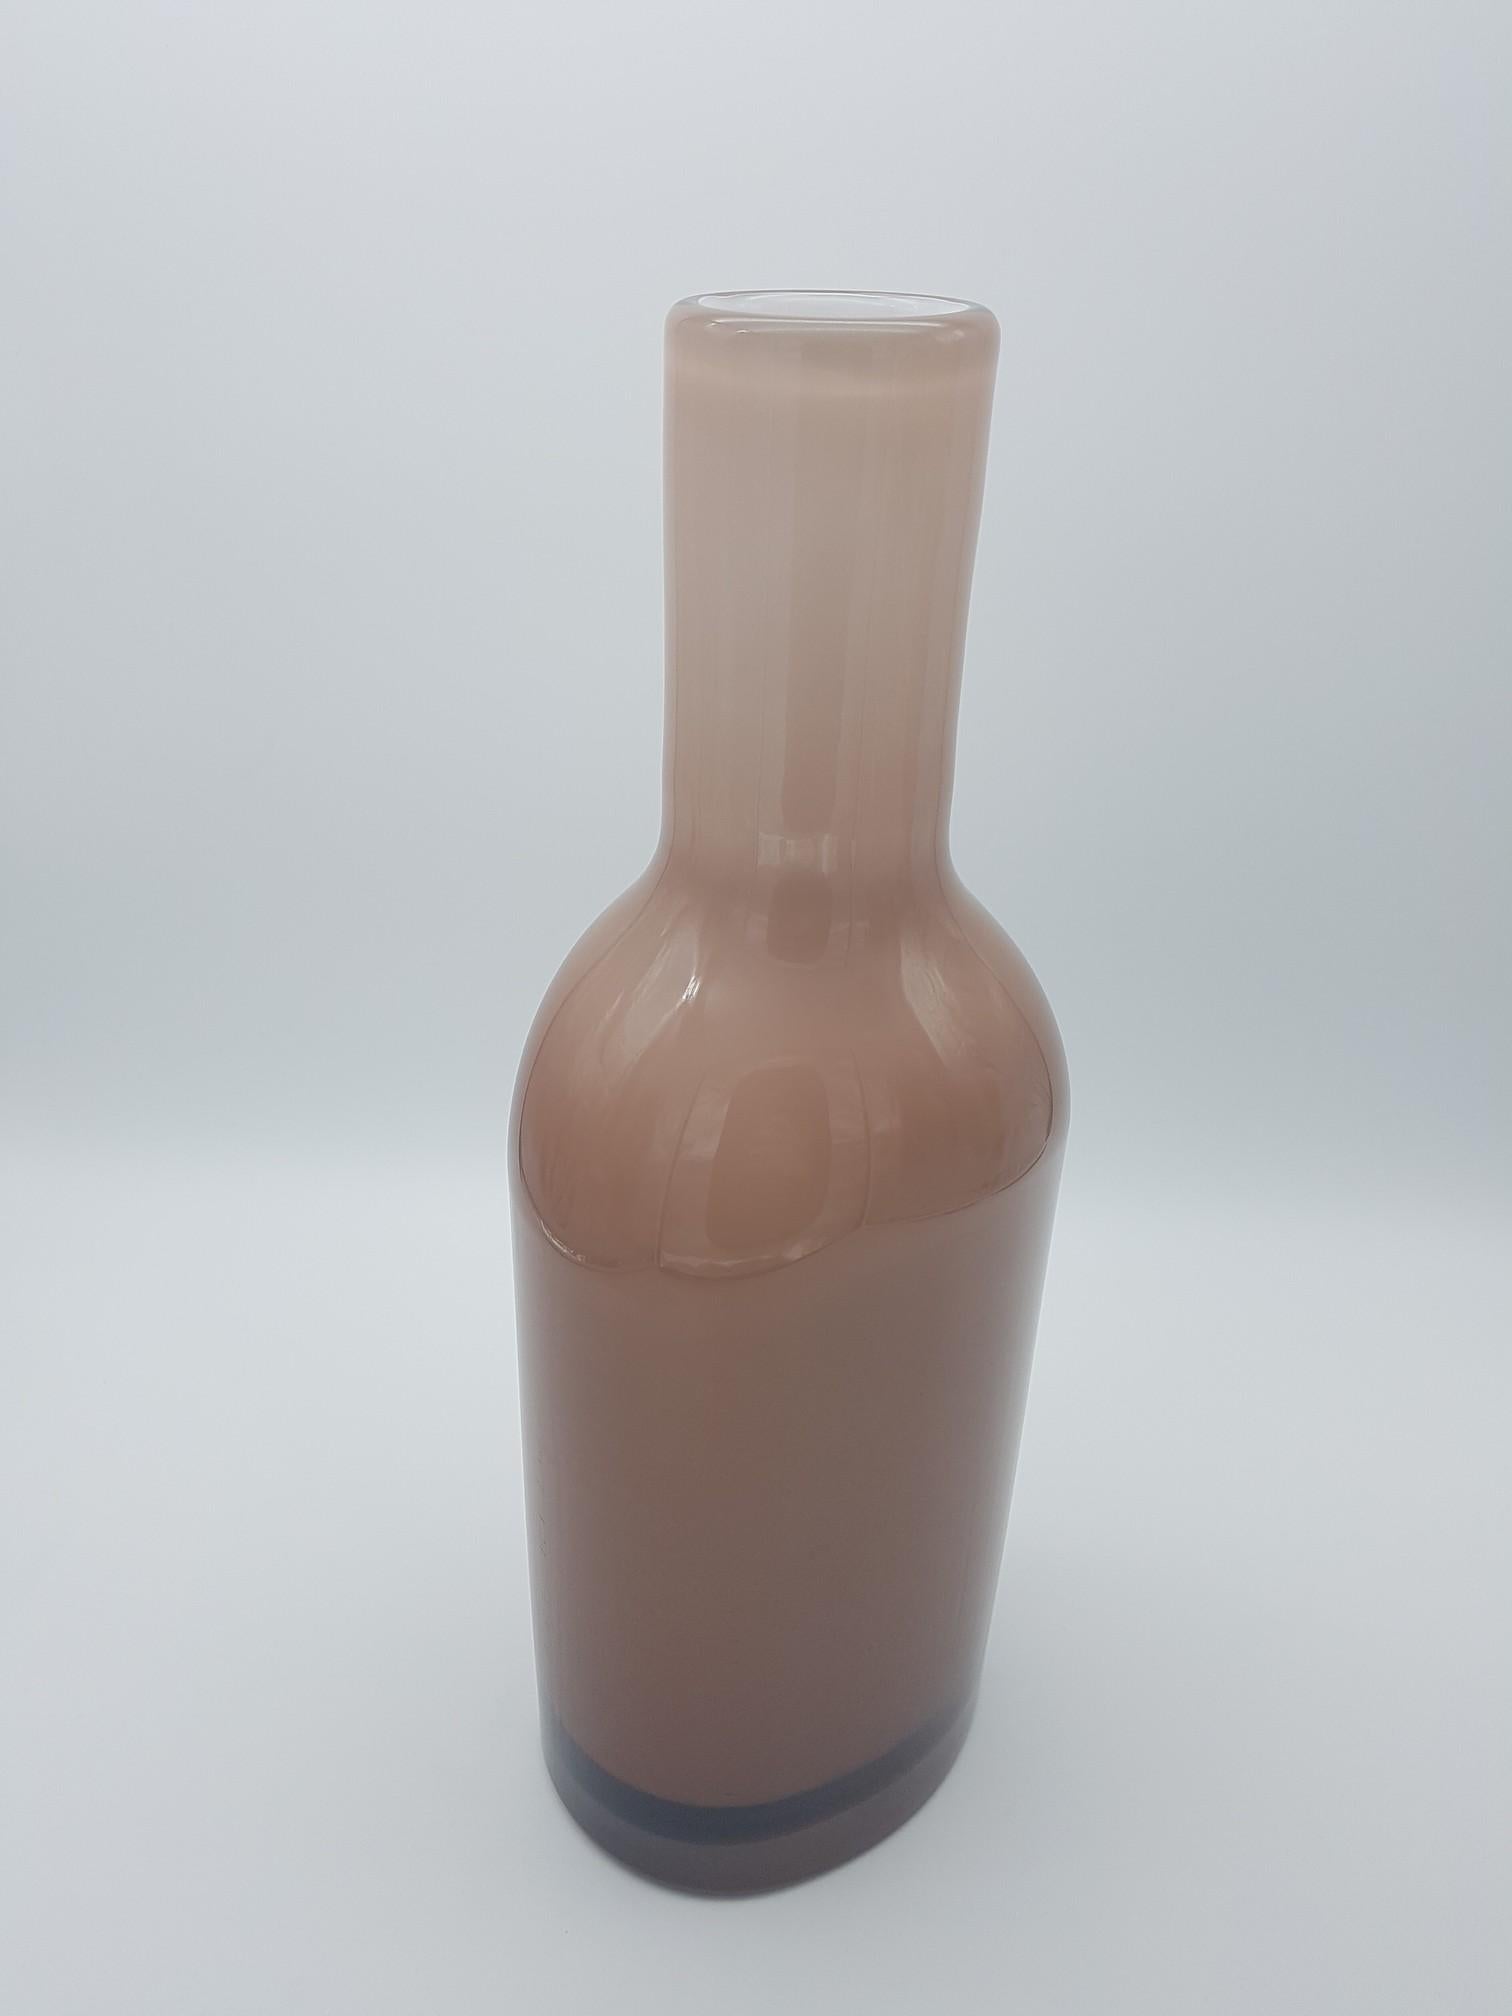 Late 20th Century Modern Murano Glass Vase/ Bottle Beige/Sand Color 'incamiciato' by Cenedese For Sale